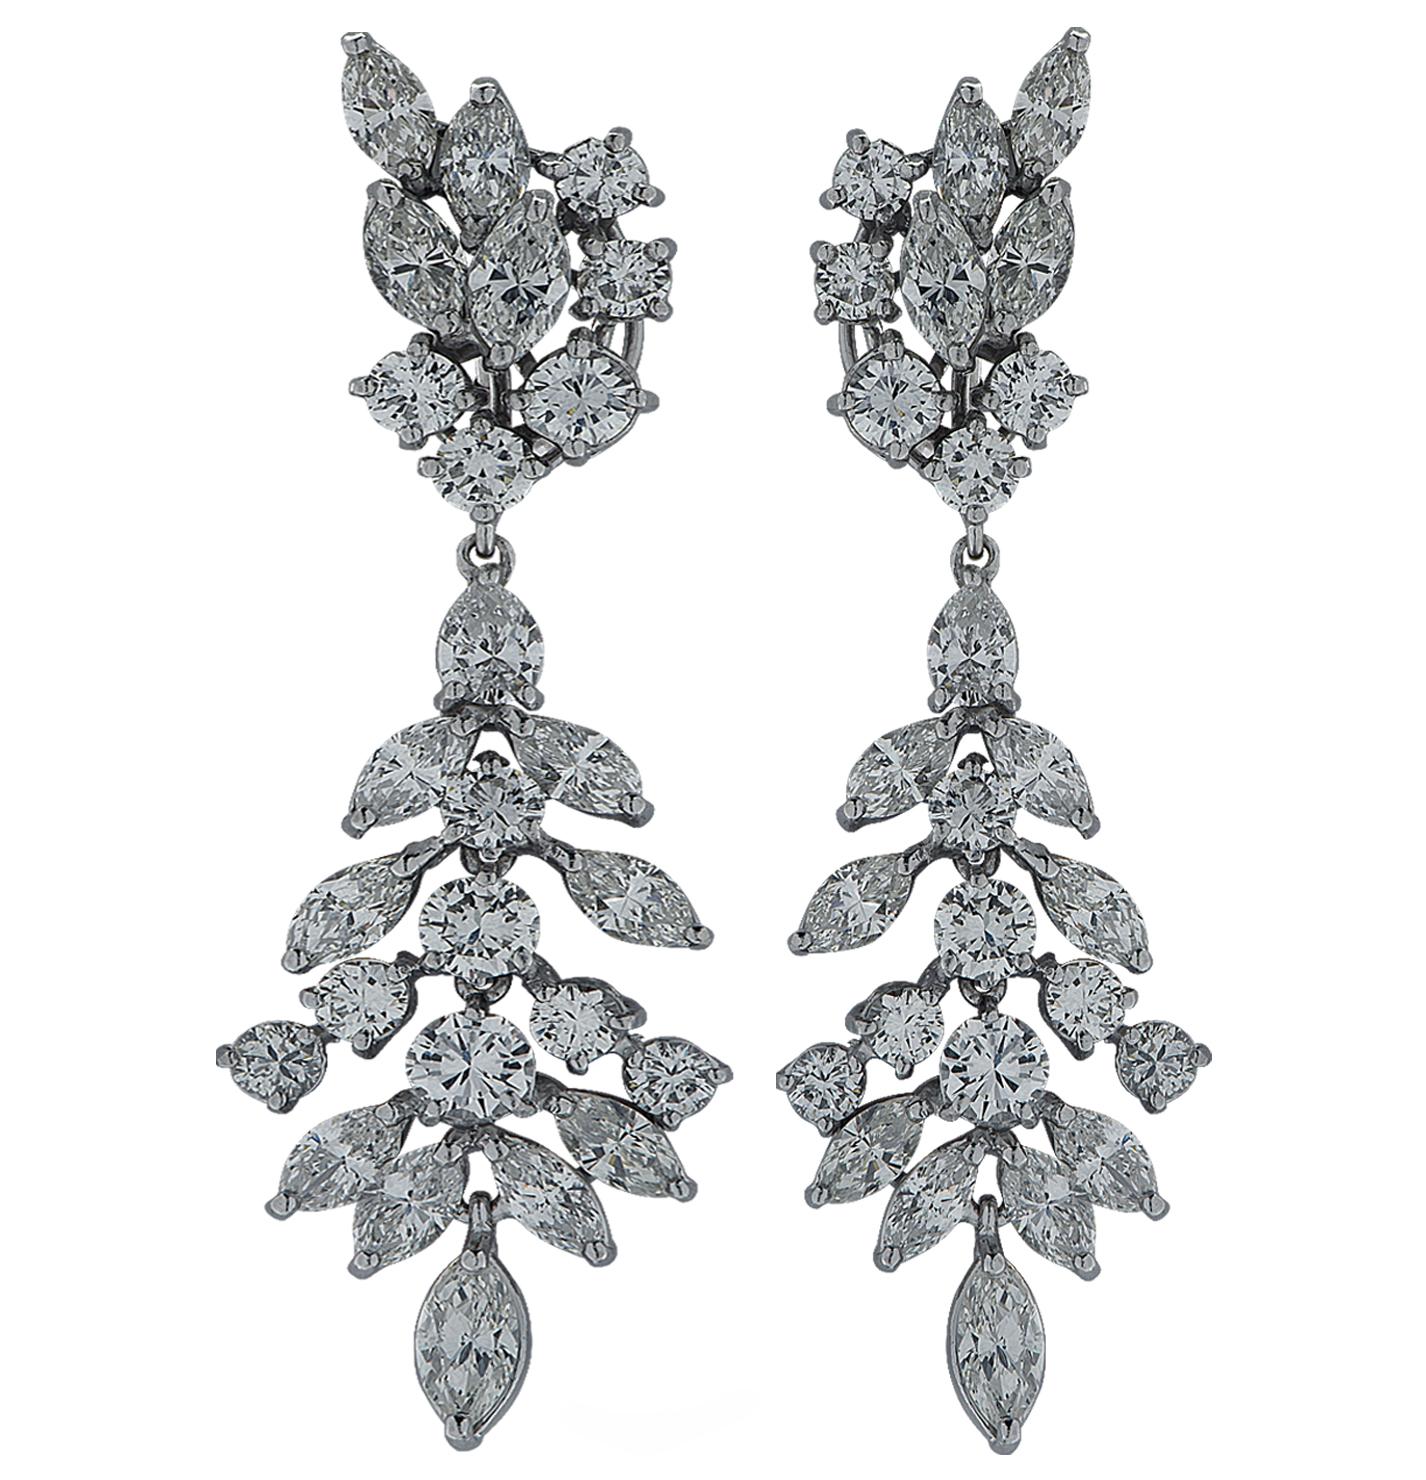 Dazzling Diamond Dangle Earrings crafted in platinum showcasing a stunning collection of 52 round brilliant cut and marquees cut diamonds weighing approximately 10 carats total, G-H color, VS-SI clarity, measuring 2.25 inches in length and 0.66